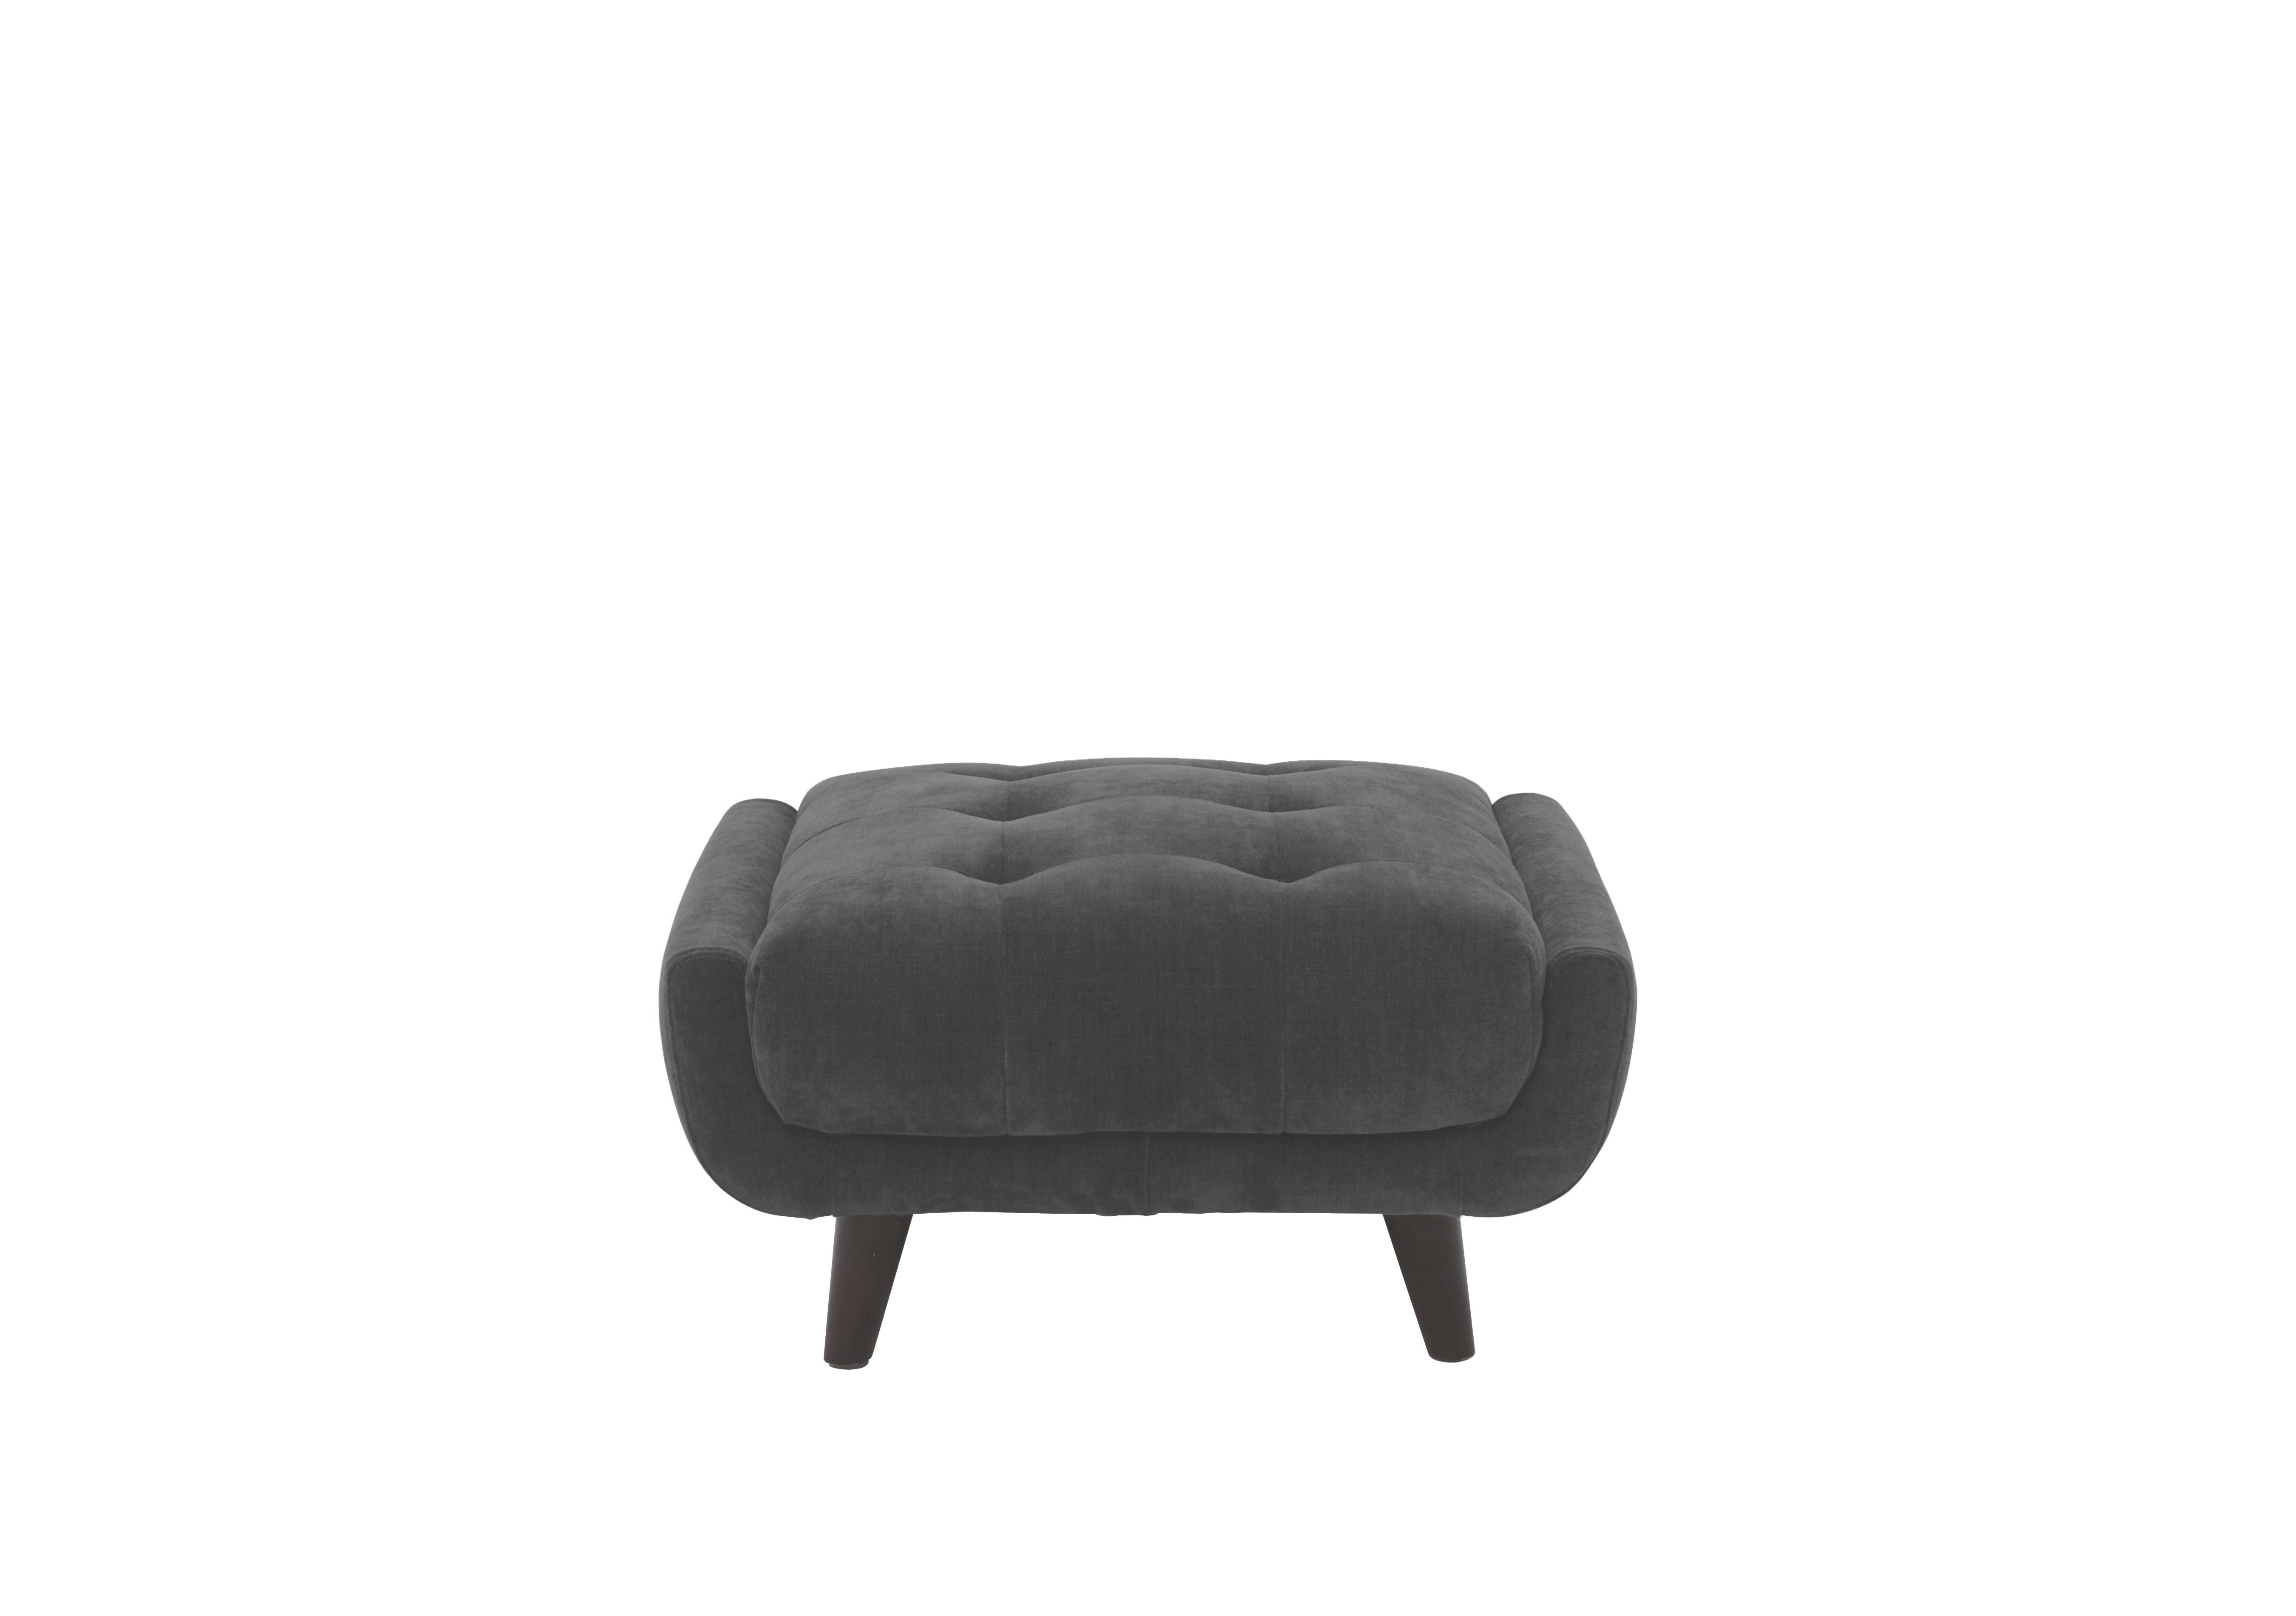 Rene Small Fabric Footstool in Manhattan 58003 Charcoal Es Ft on Furniture Village